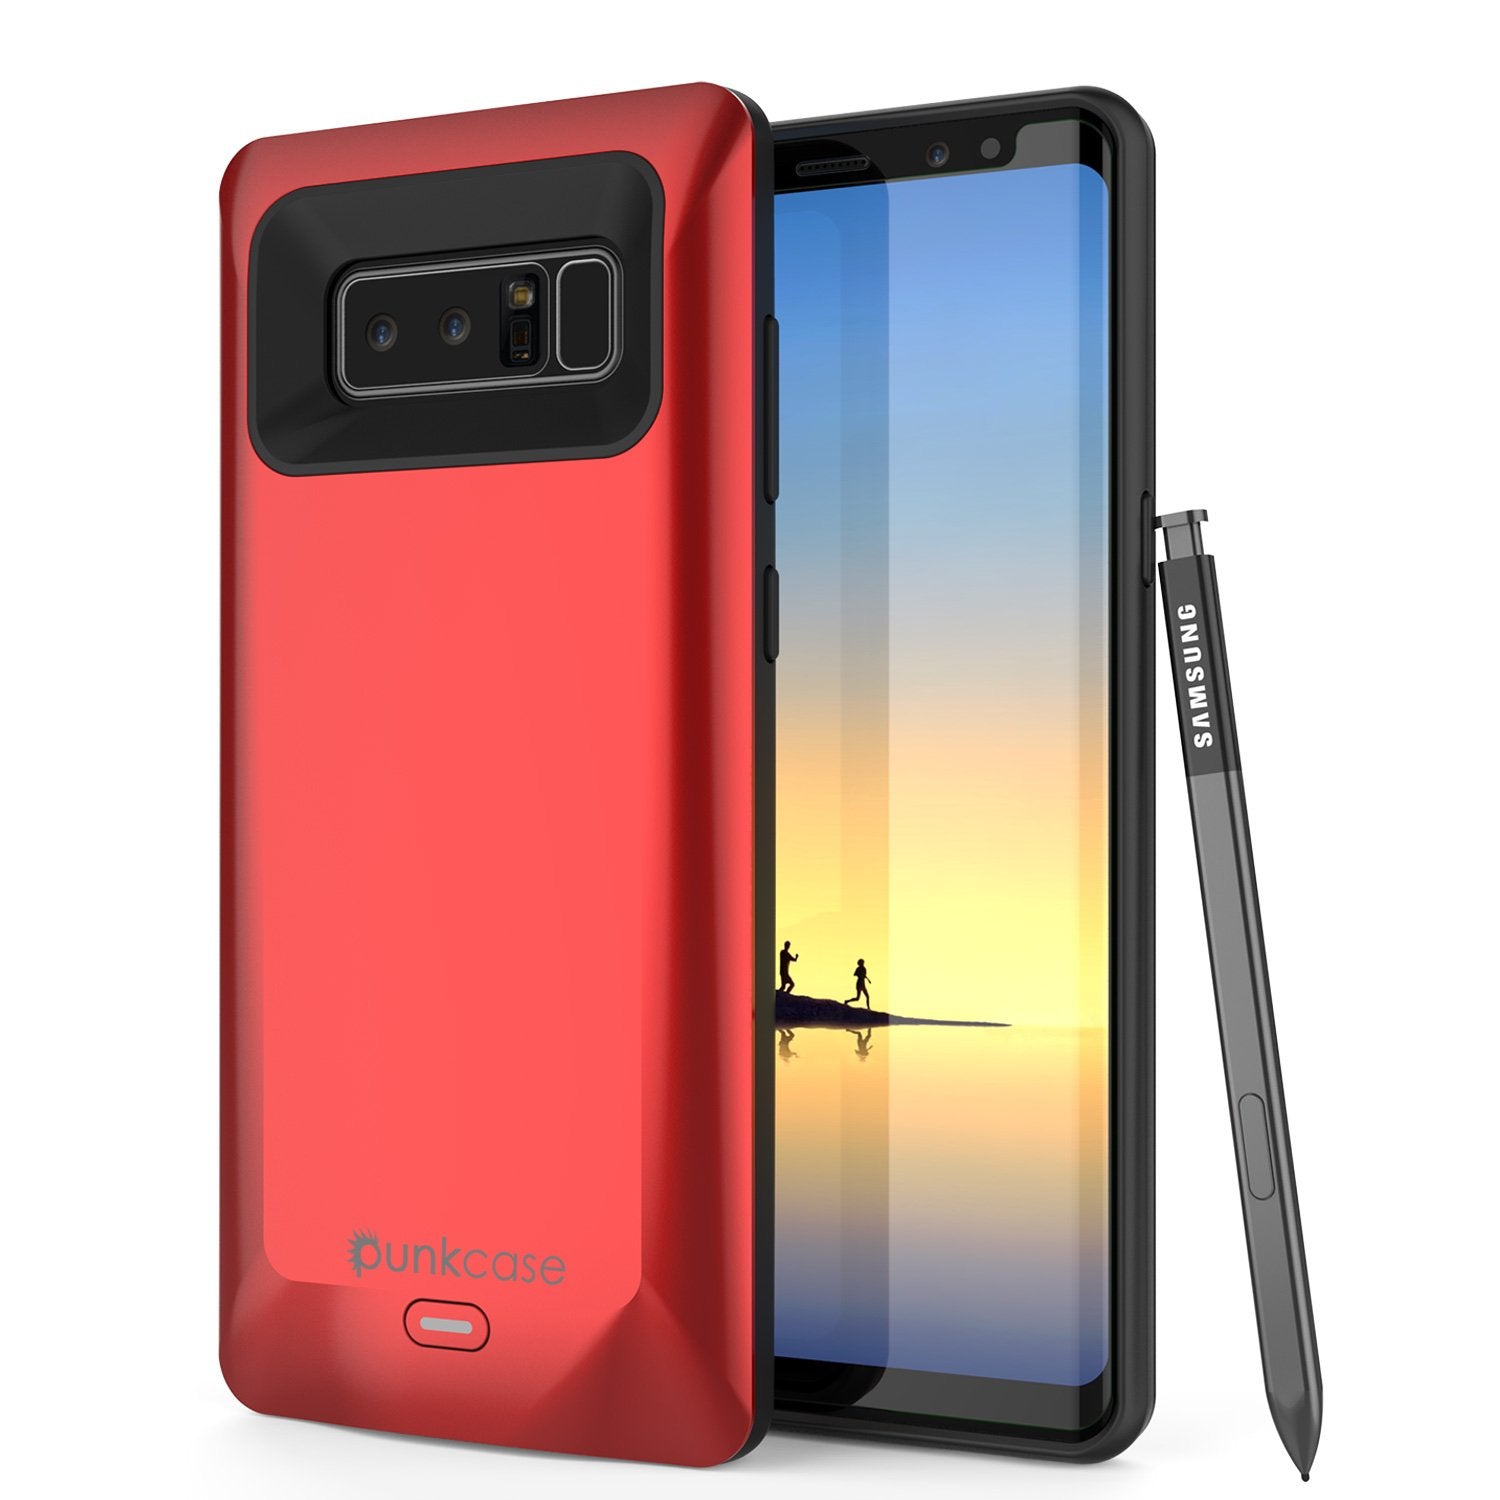 Galaxy Note 8 Battery Case, Punkcase 5000mAH Charger Case W/ Screen Protector | Integrated USB Port | IntelSwitch [Blue]